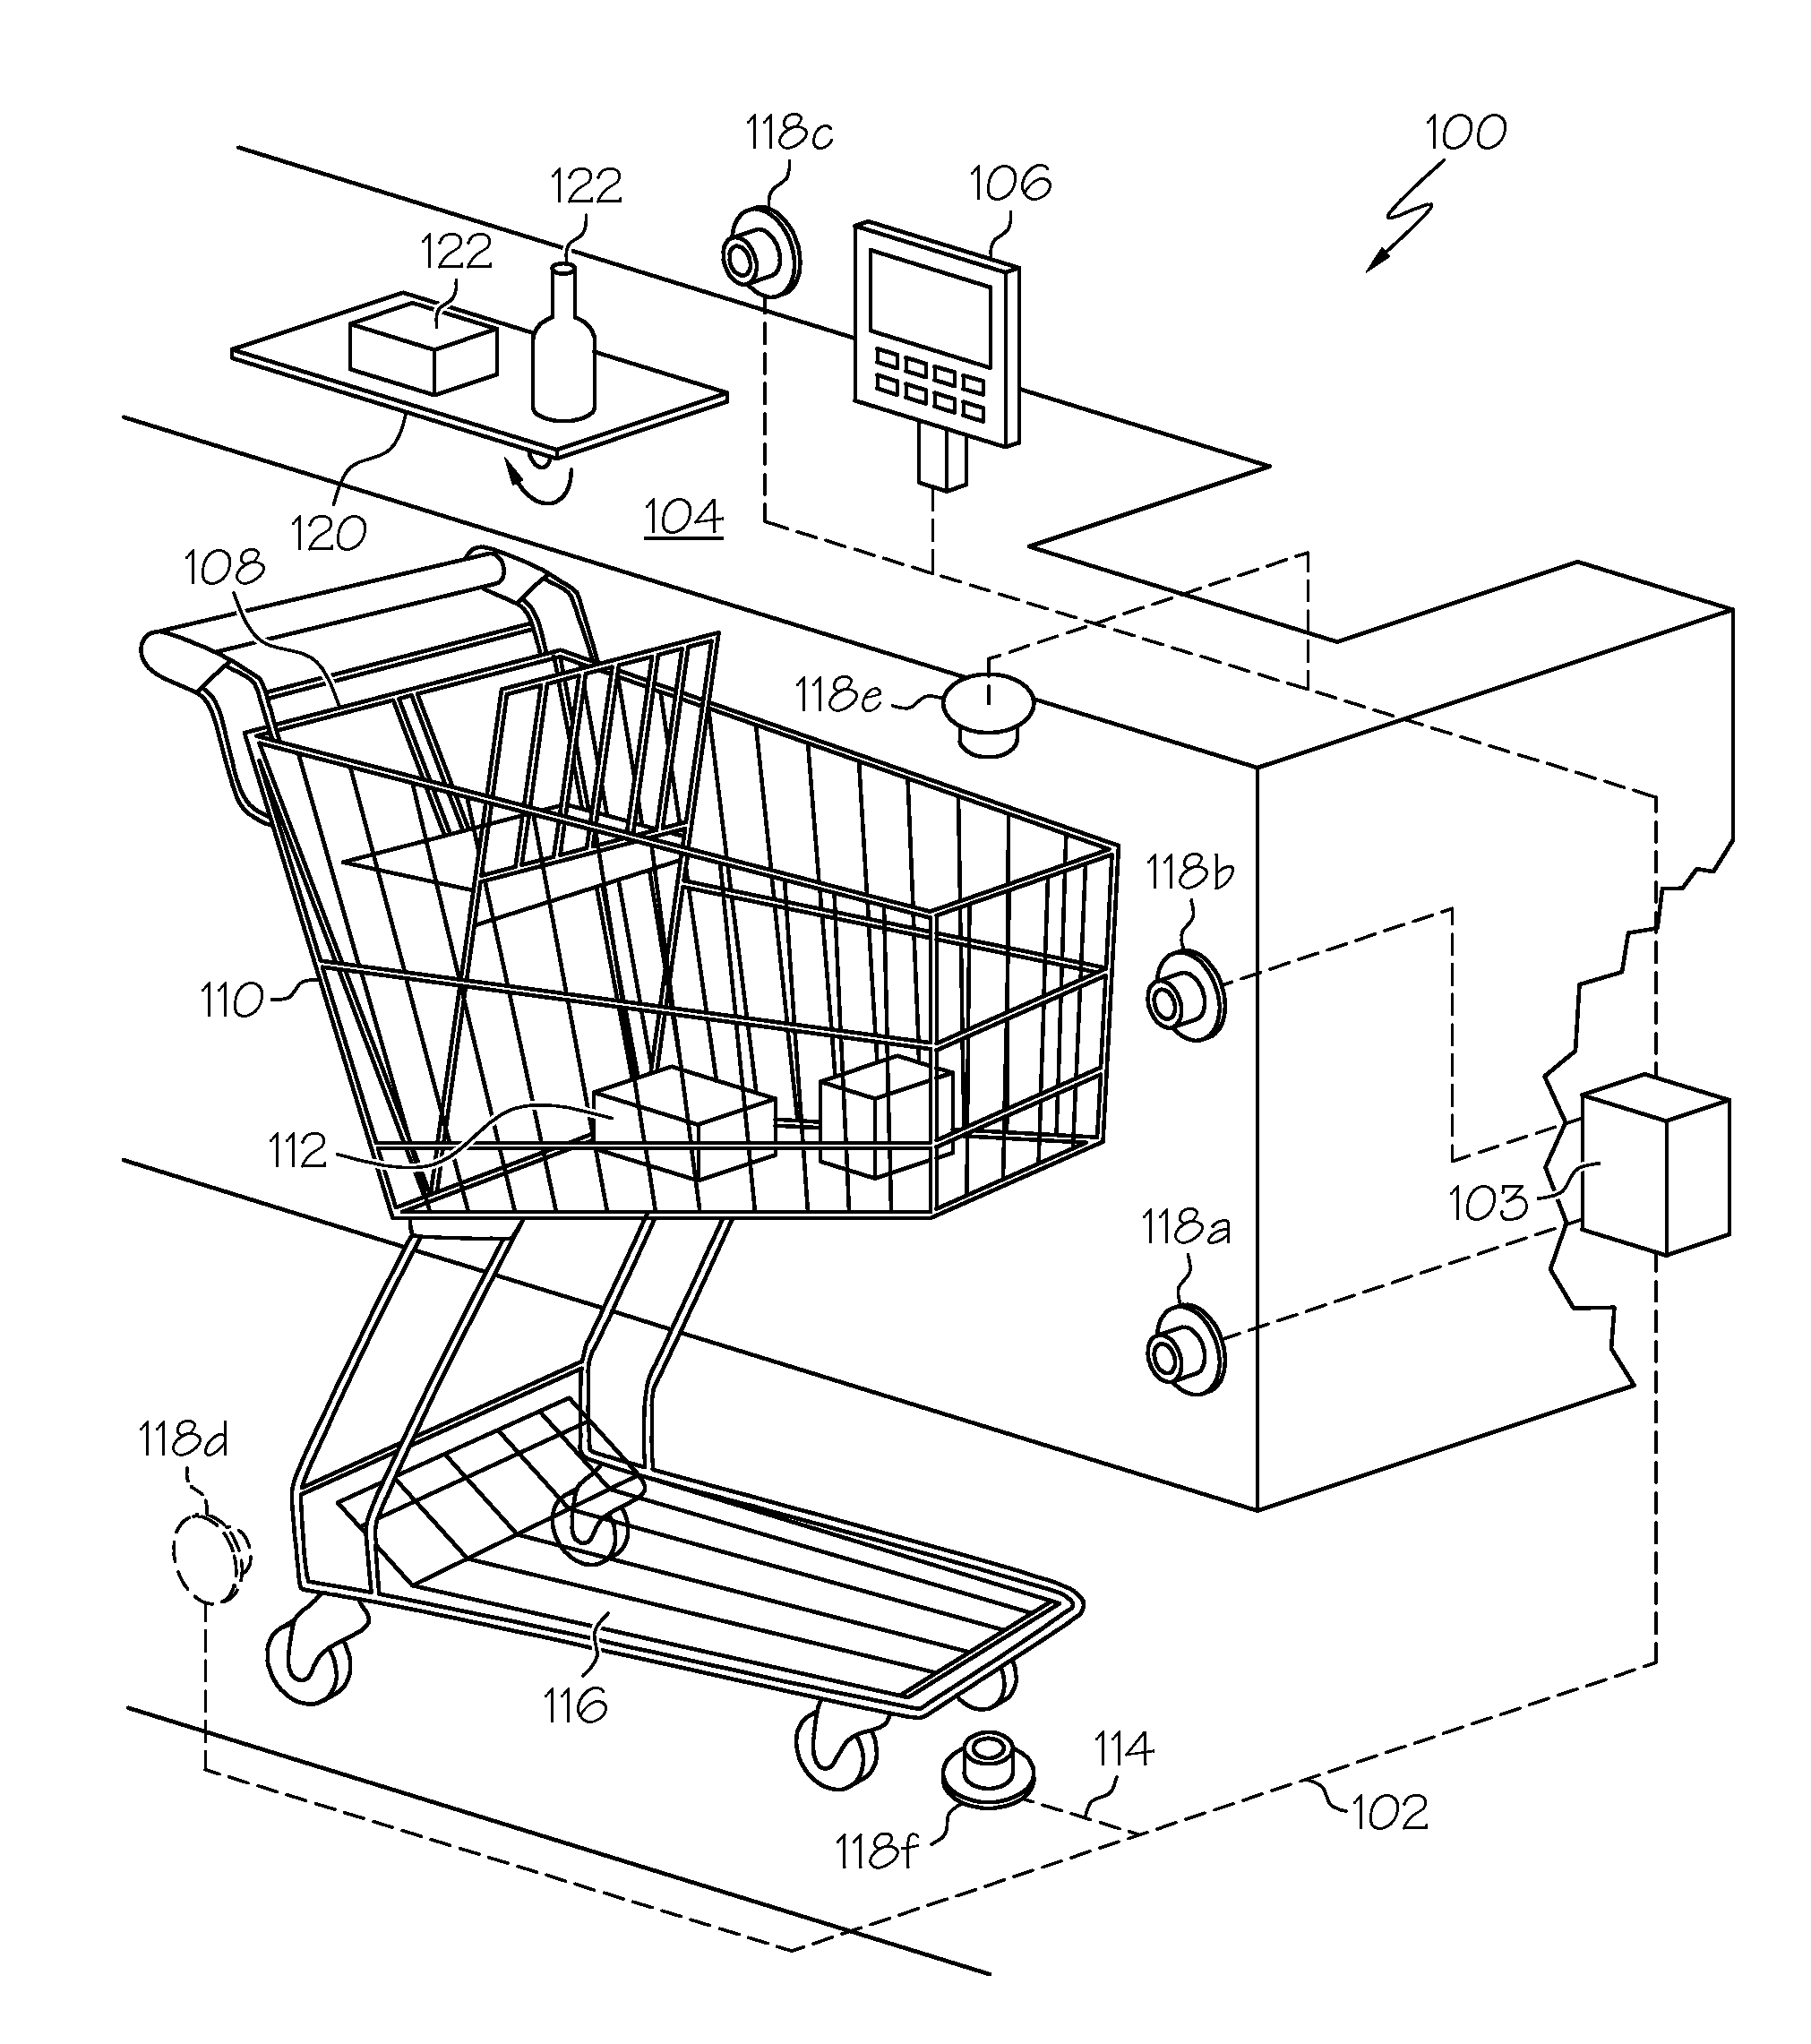 Method of merchandising for checkout lanes